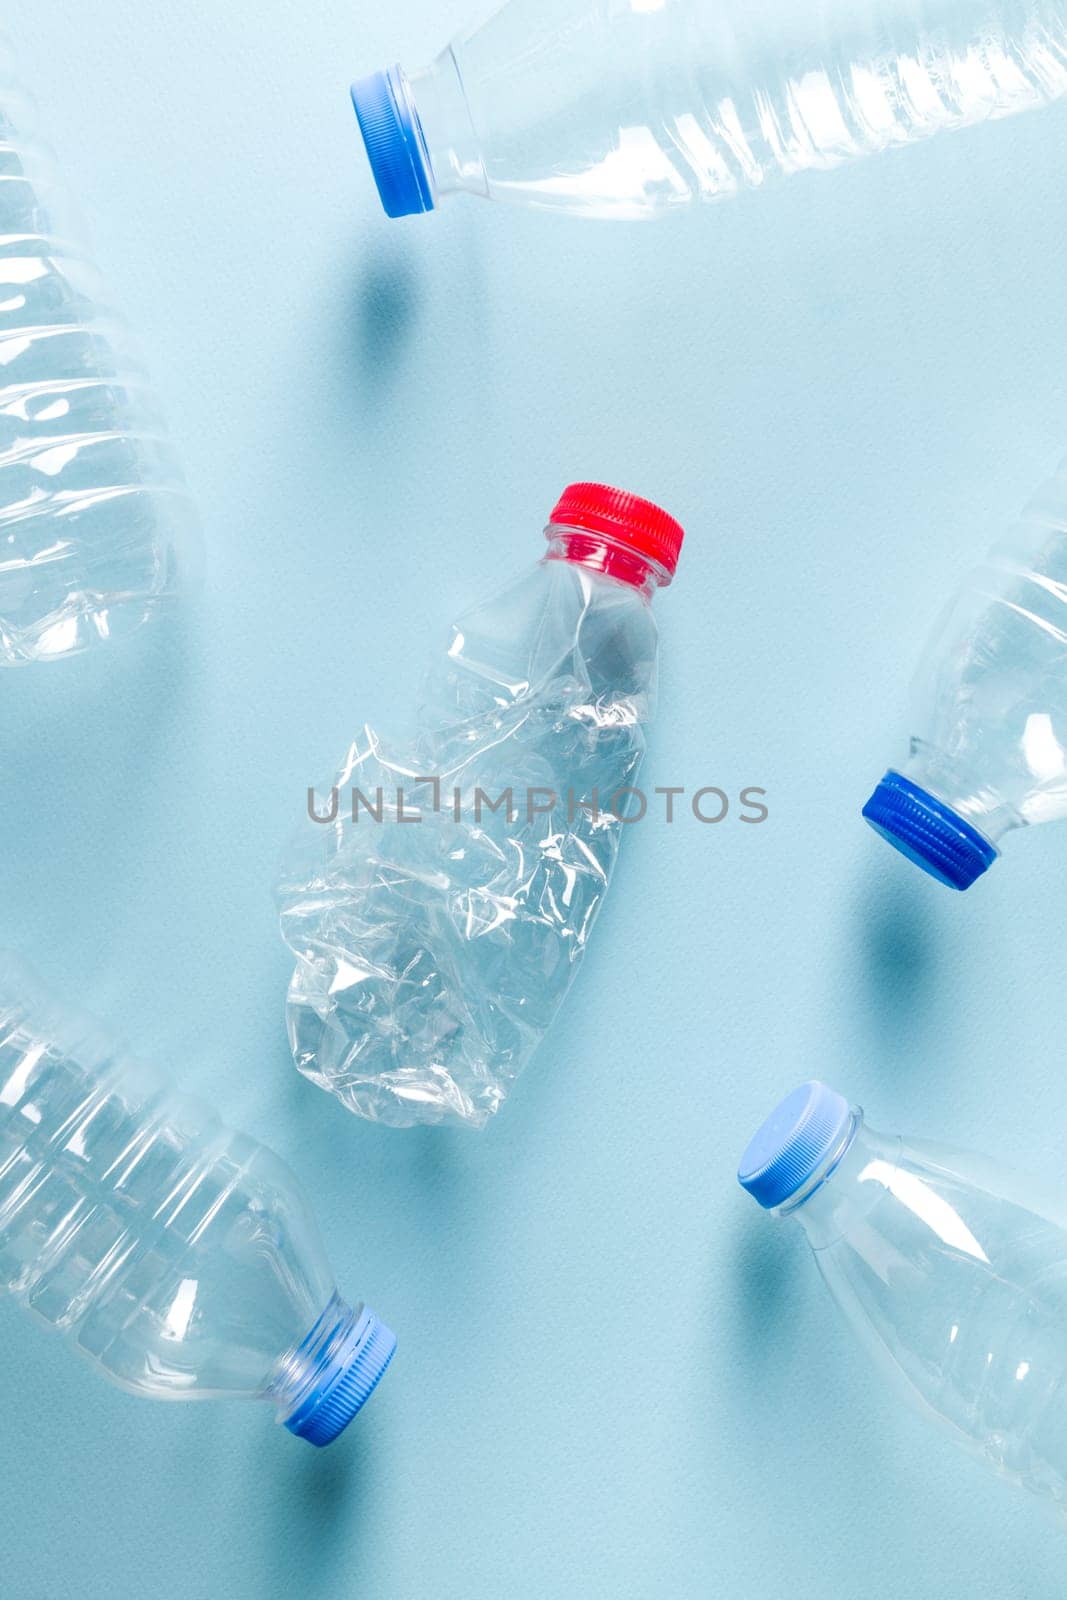 Crushed plastic water bottles with blue caps standing around crushed plastic water bottle with red cap on blue background by Sonat